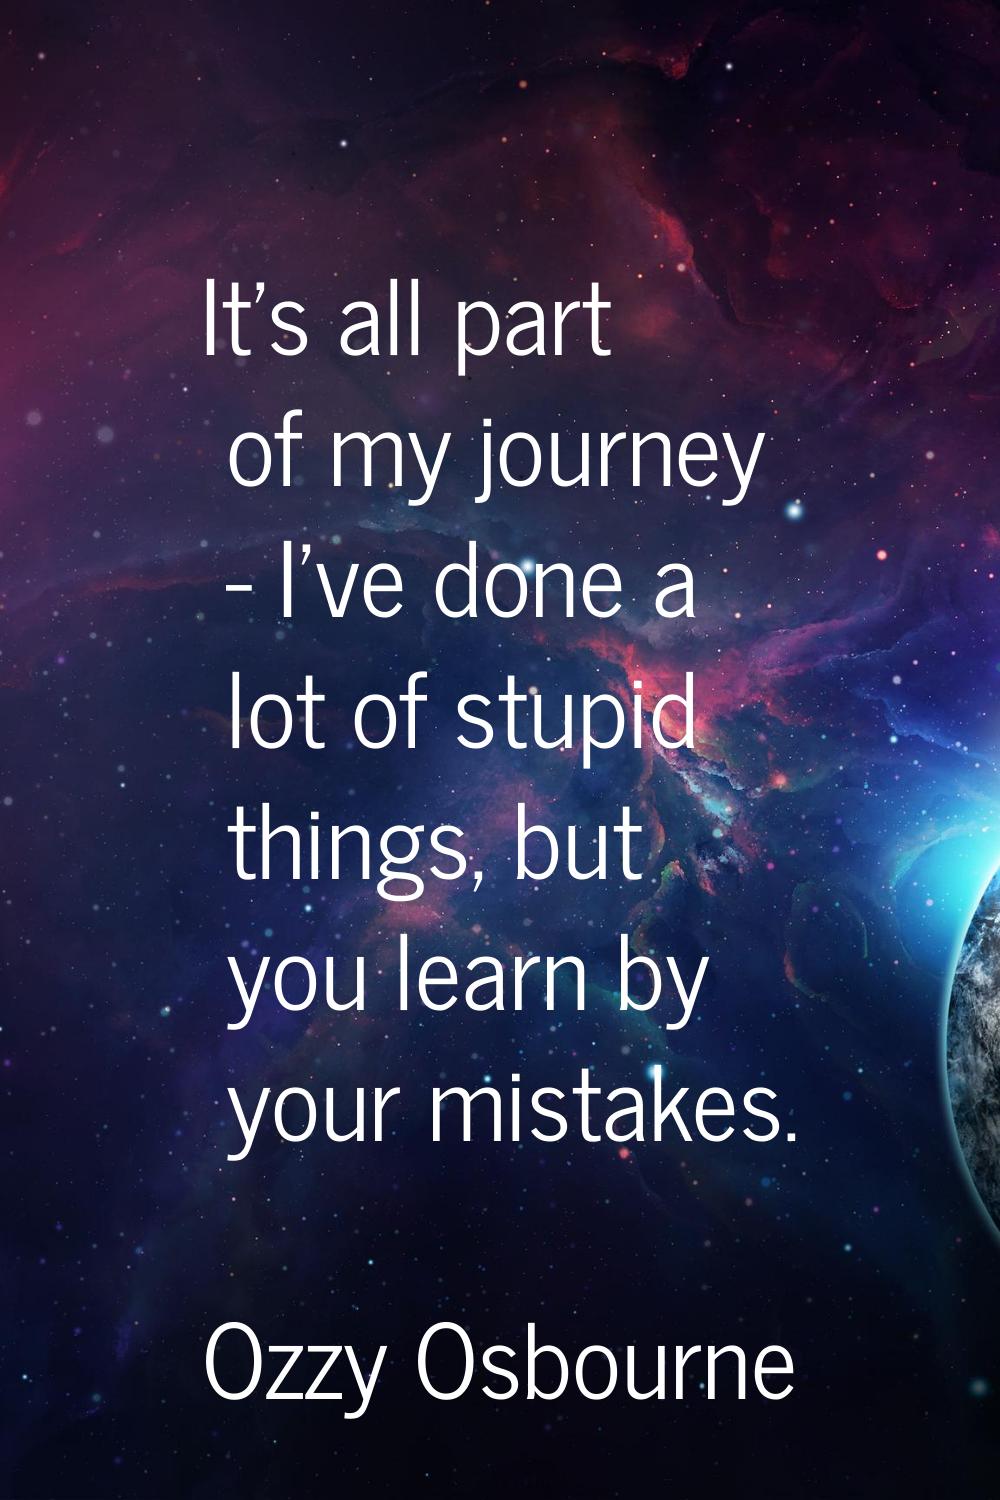 It's all part of my journey - I've done a lot of stupid things, but you learn by your mistakes.